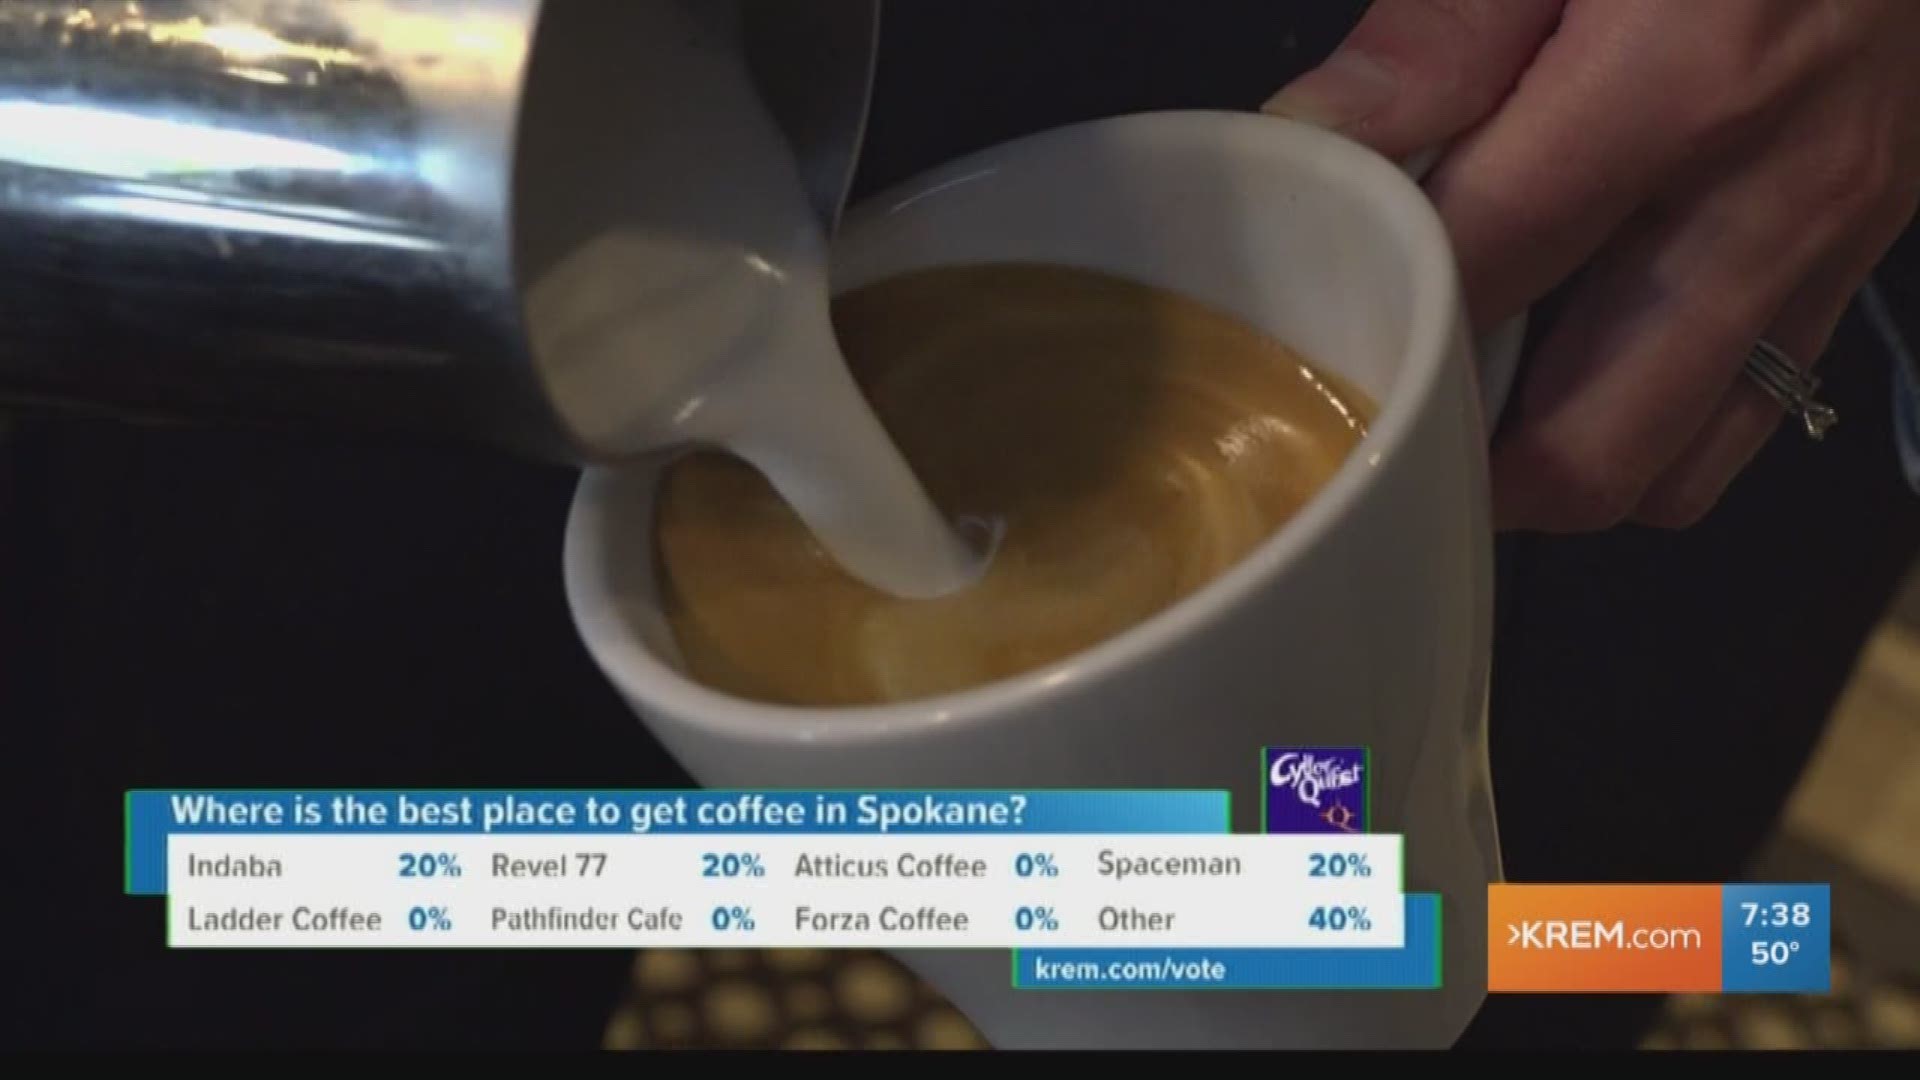 Are you one of those who thinks Spokane is a great place to grab a Cup of Joe? Livability agrees.